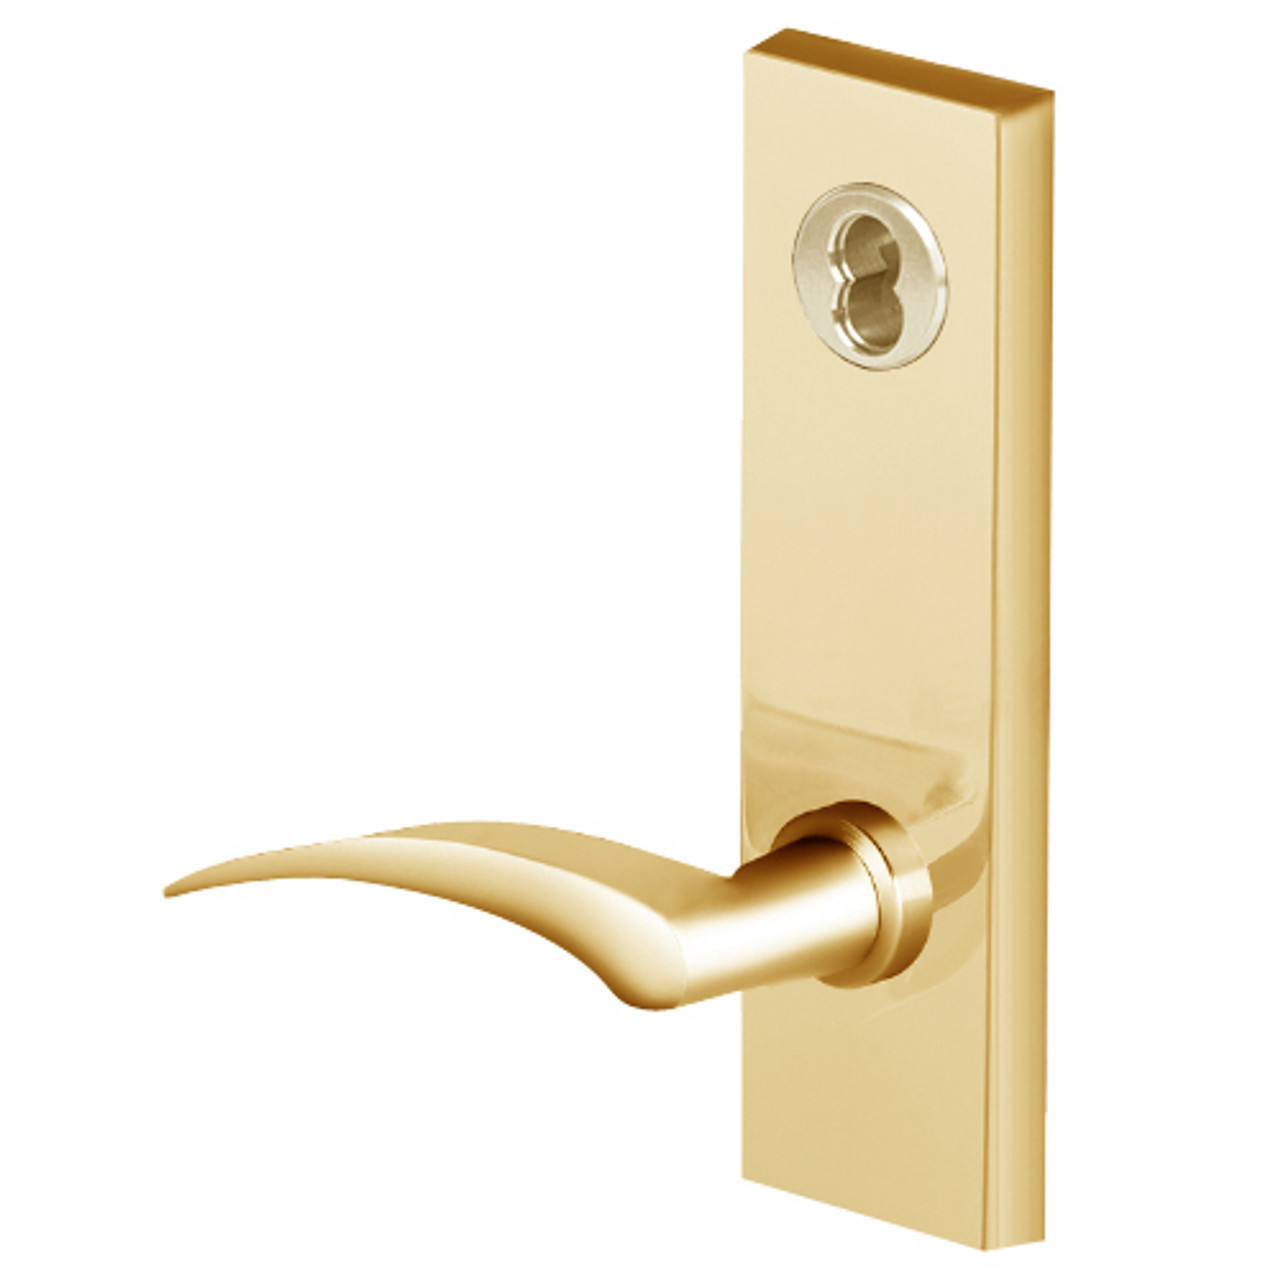 45H7HJ17RM605 Best 40H Series Hotel with Deadbolt Heavy Duty Mortise Lever Lock with Gull Wing RH in Bright Brass